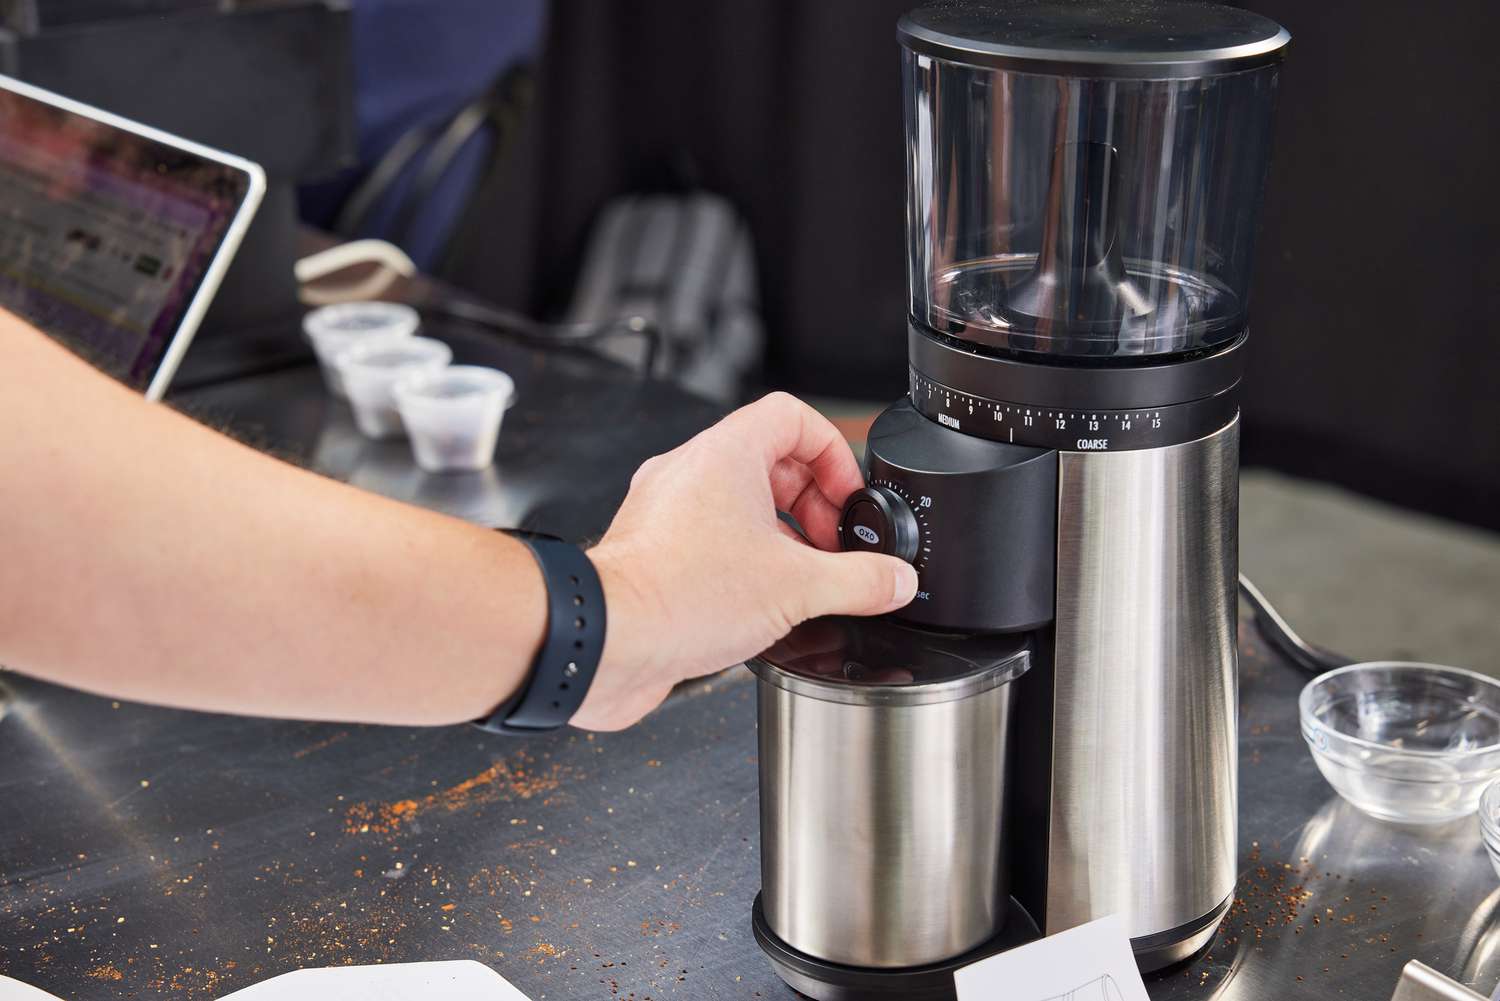 Oxo conical burr grinder being used